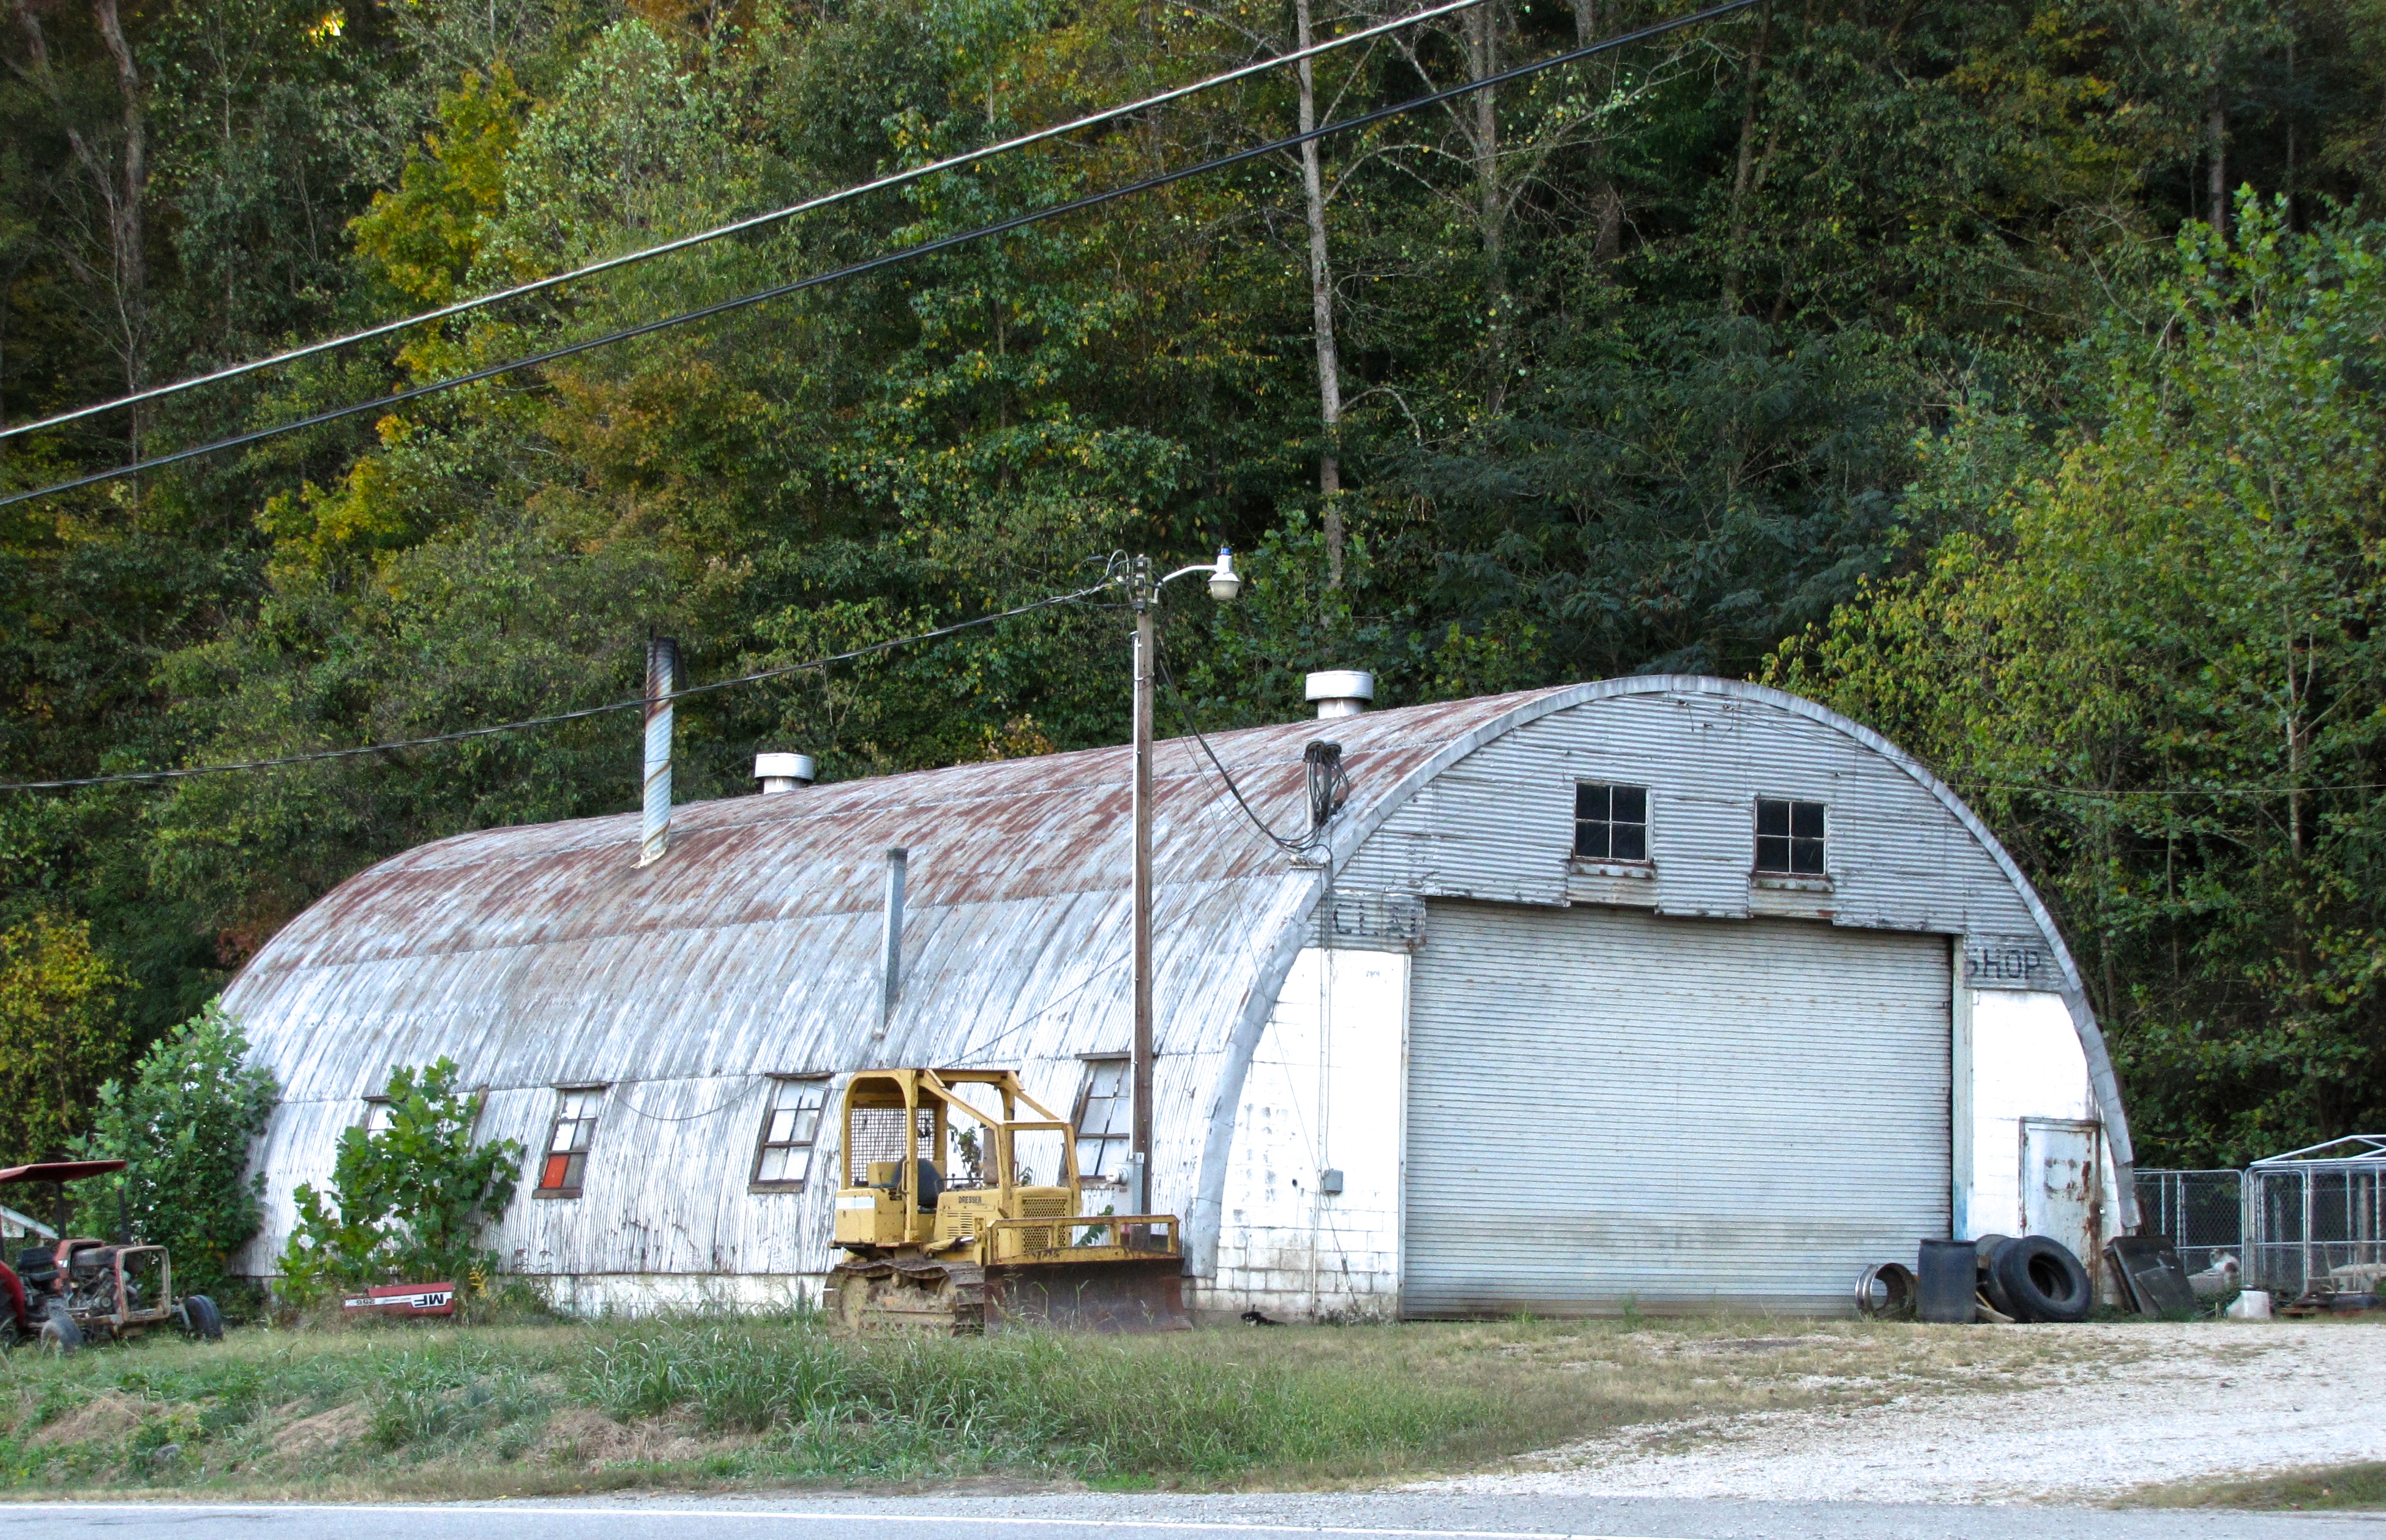 quonset hut in Privacy Policy, MI